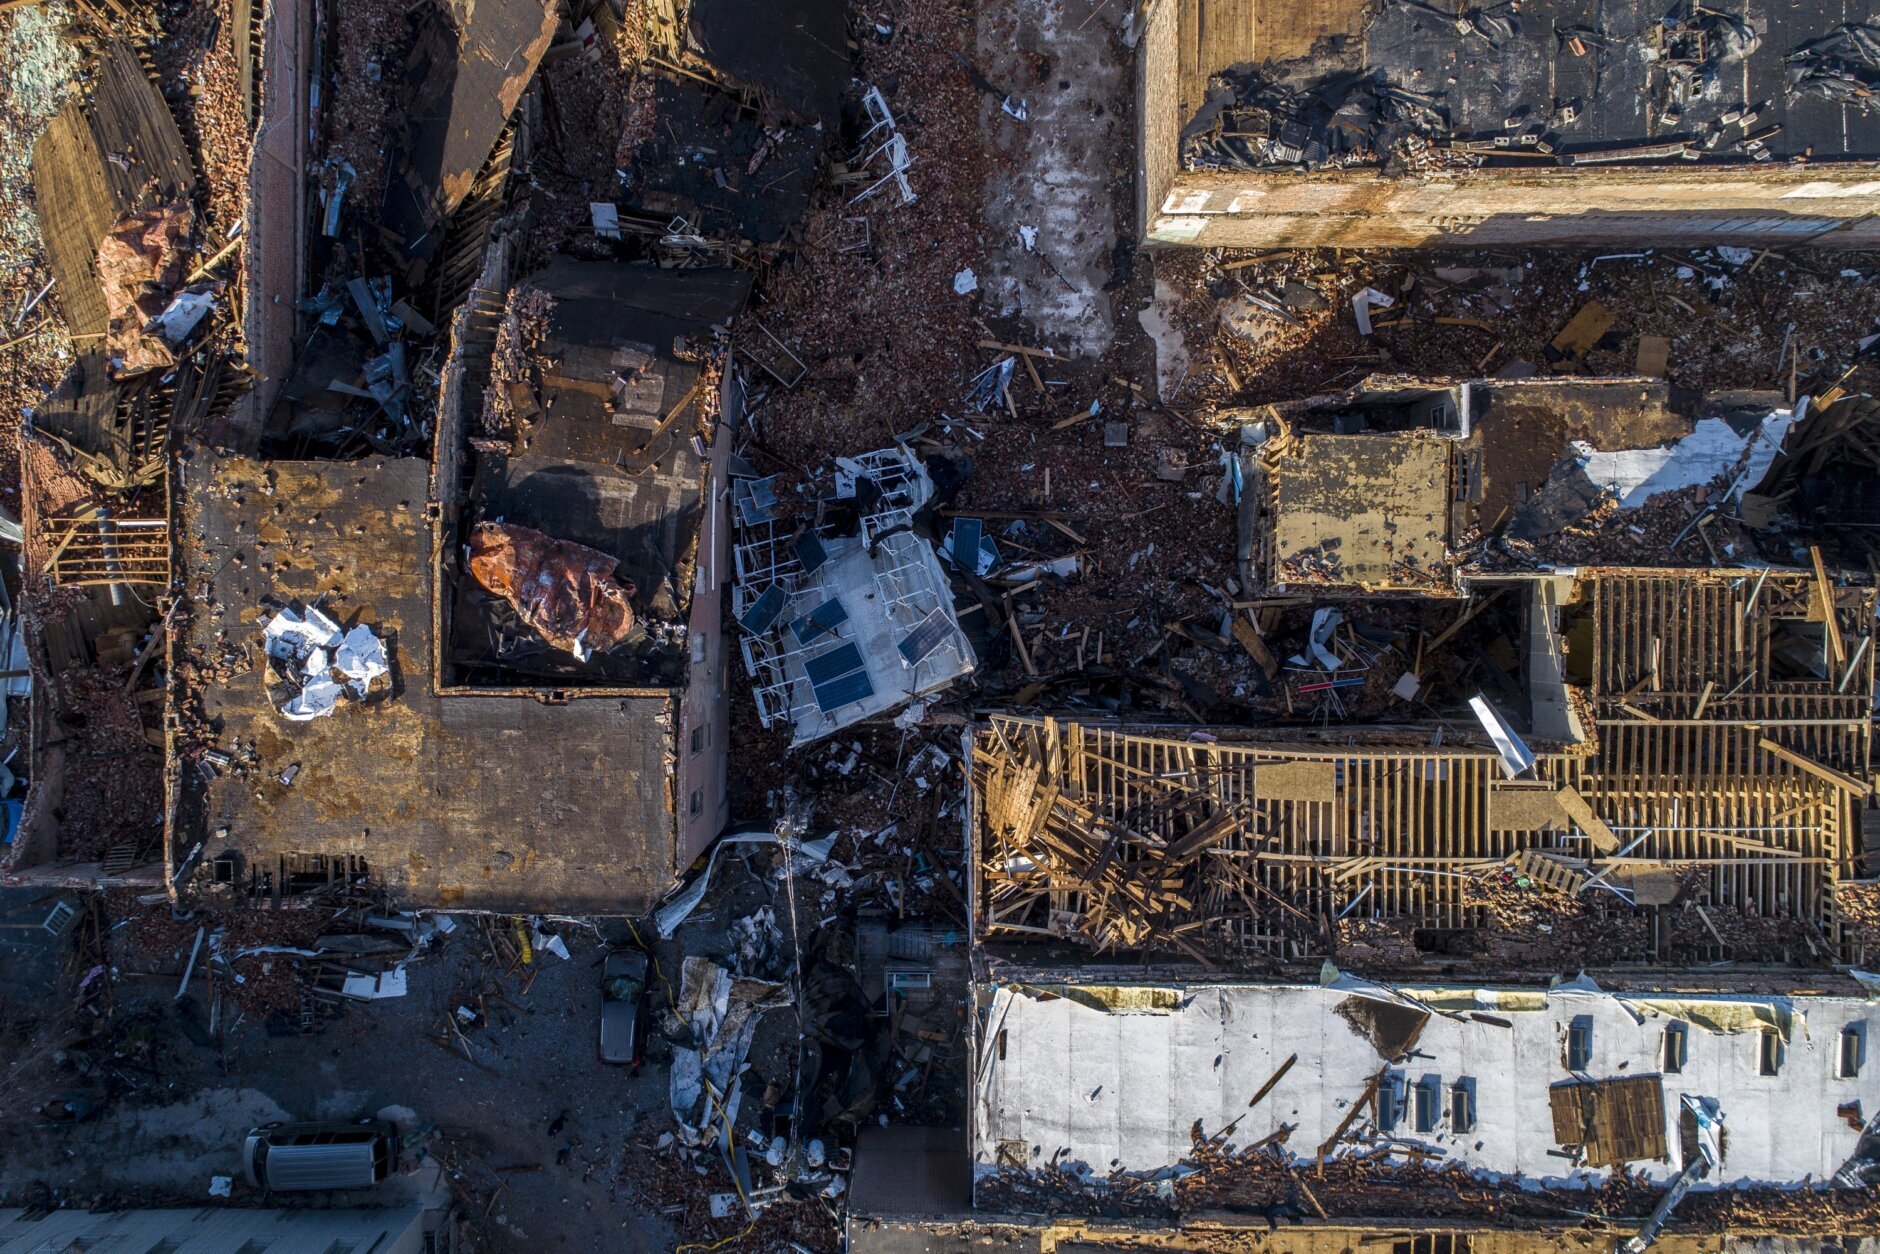 In this photo taken by a drone, buildings are demolished in downtown Mayfield, Ky., on Saturday, Dec. 11, 2021, after a tornado traveled through the region Friday night. A monstrous tornado killed dozens of people in Kentucky and the toll was climbing Saturday after severe weather ripped through at least five states, leaving widespread devastation. (Ryan C. Hermens/Lexington Herald-Leader via AP)